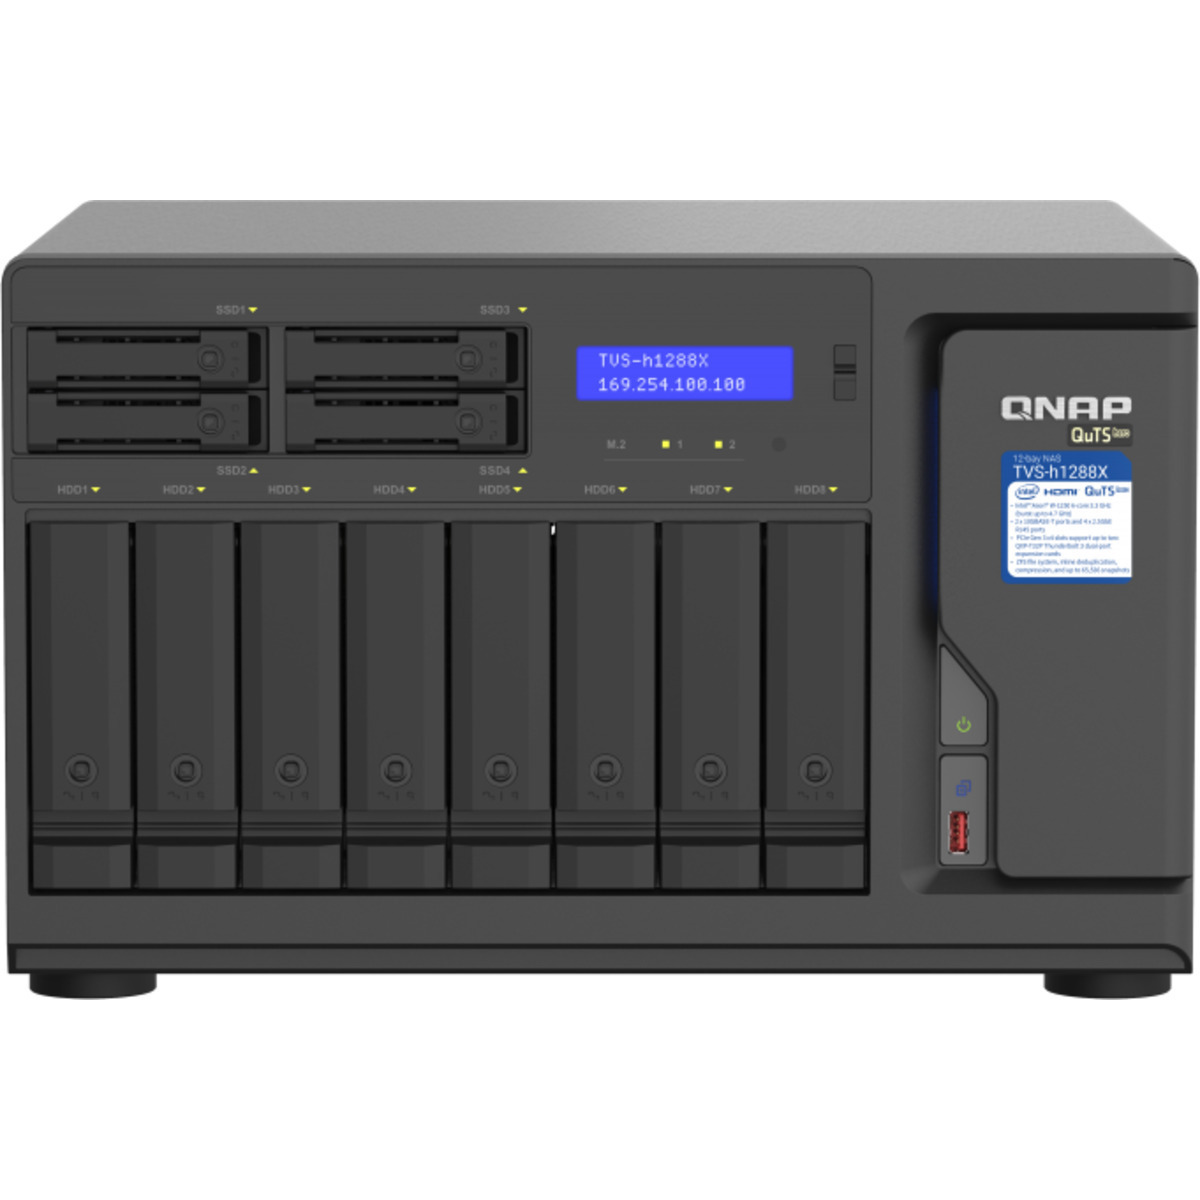 QNAP TVS-h1288X QuTS hero NAS 20tb 8+4-Bay Desktop Multimedia / Power User / Business NAS - Network Attached Storage Device 5x4tb Western Digital Red SA500 WDS400T1R0A 2.5 560/530MB/s SATA 6Gb/s SSD NAS Class Drives Installed - Burn-In Tested TVS-h1288X QuTS hero NAS